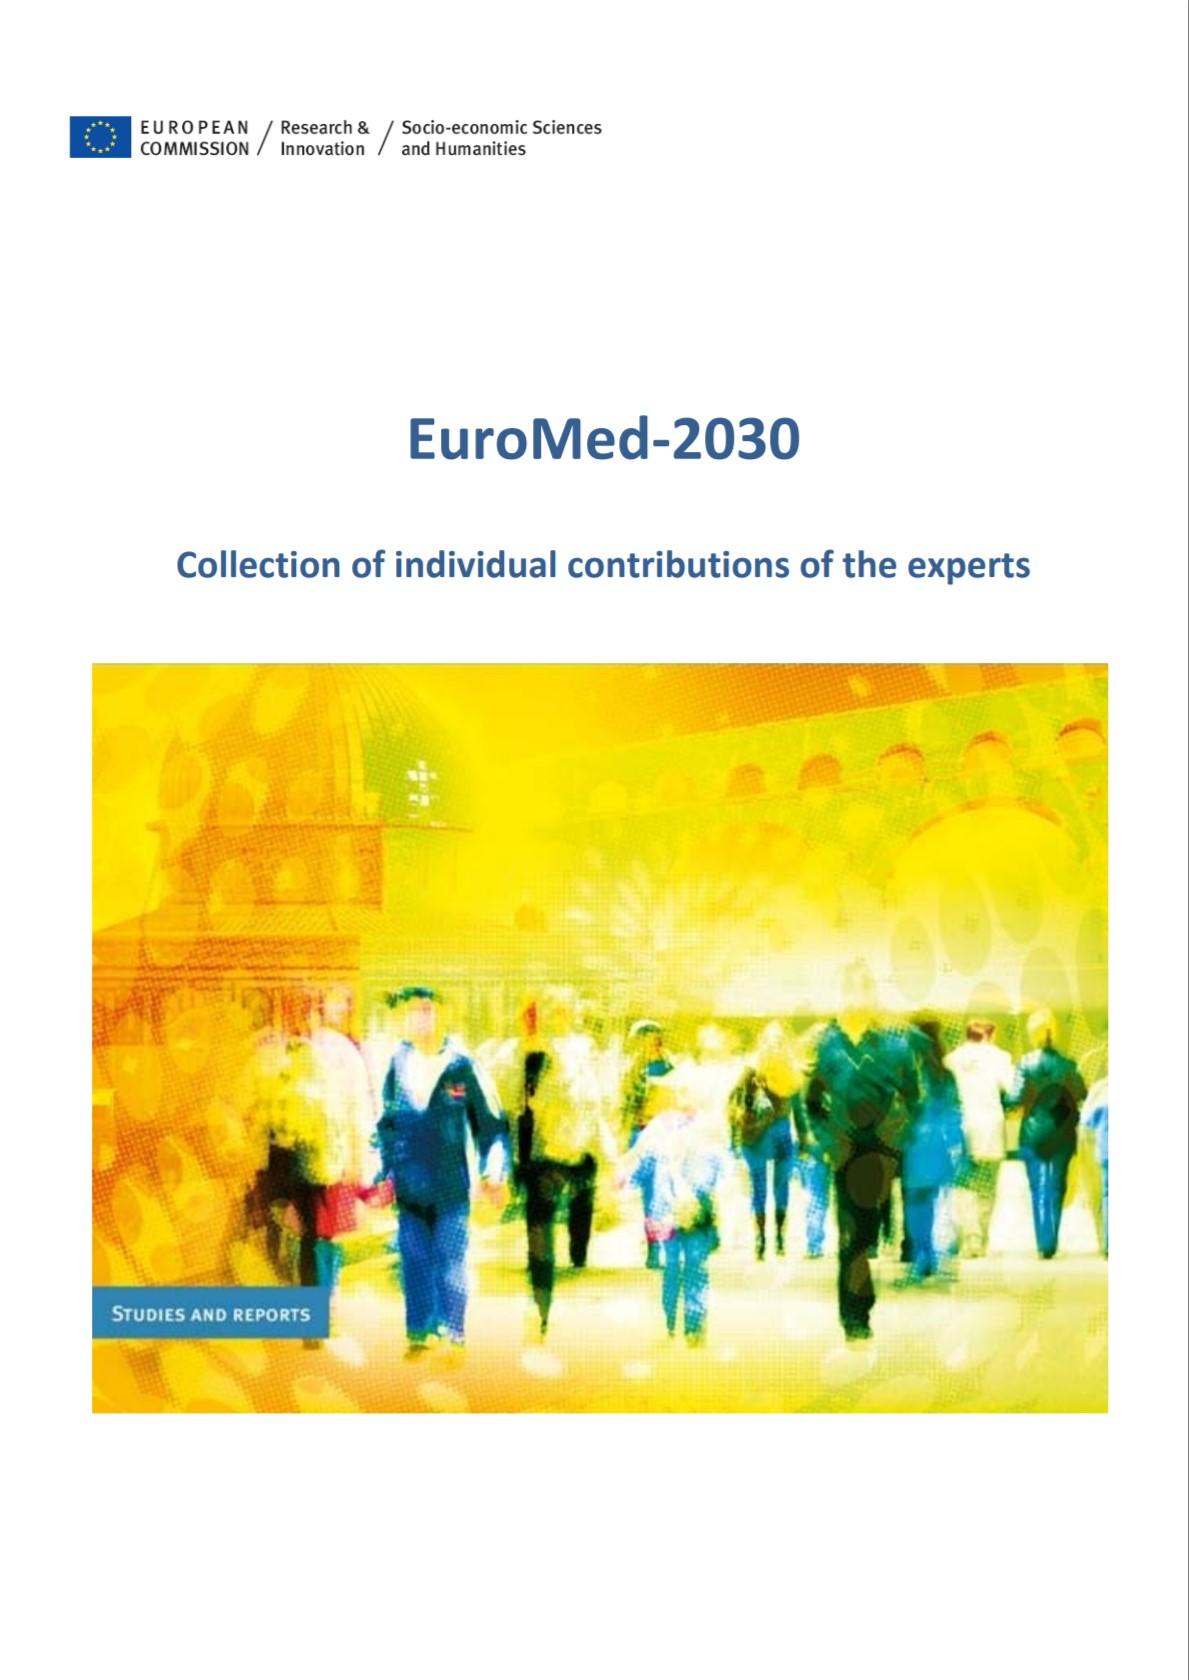 EuroMed-2030. Collection of individual contributions of the experts